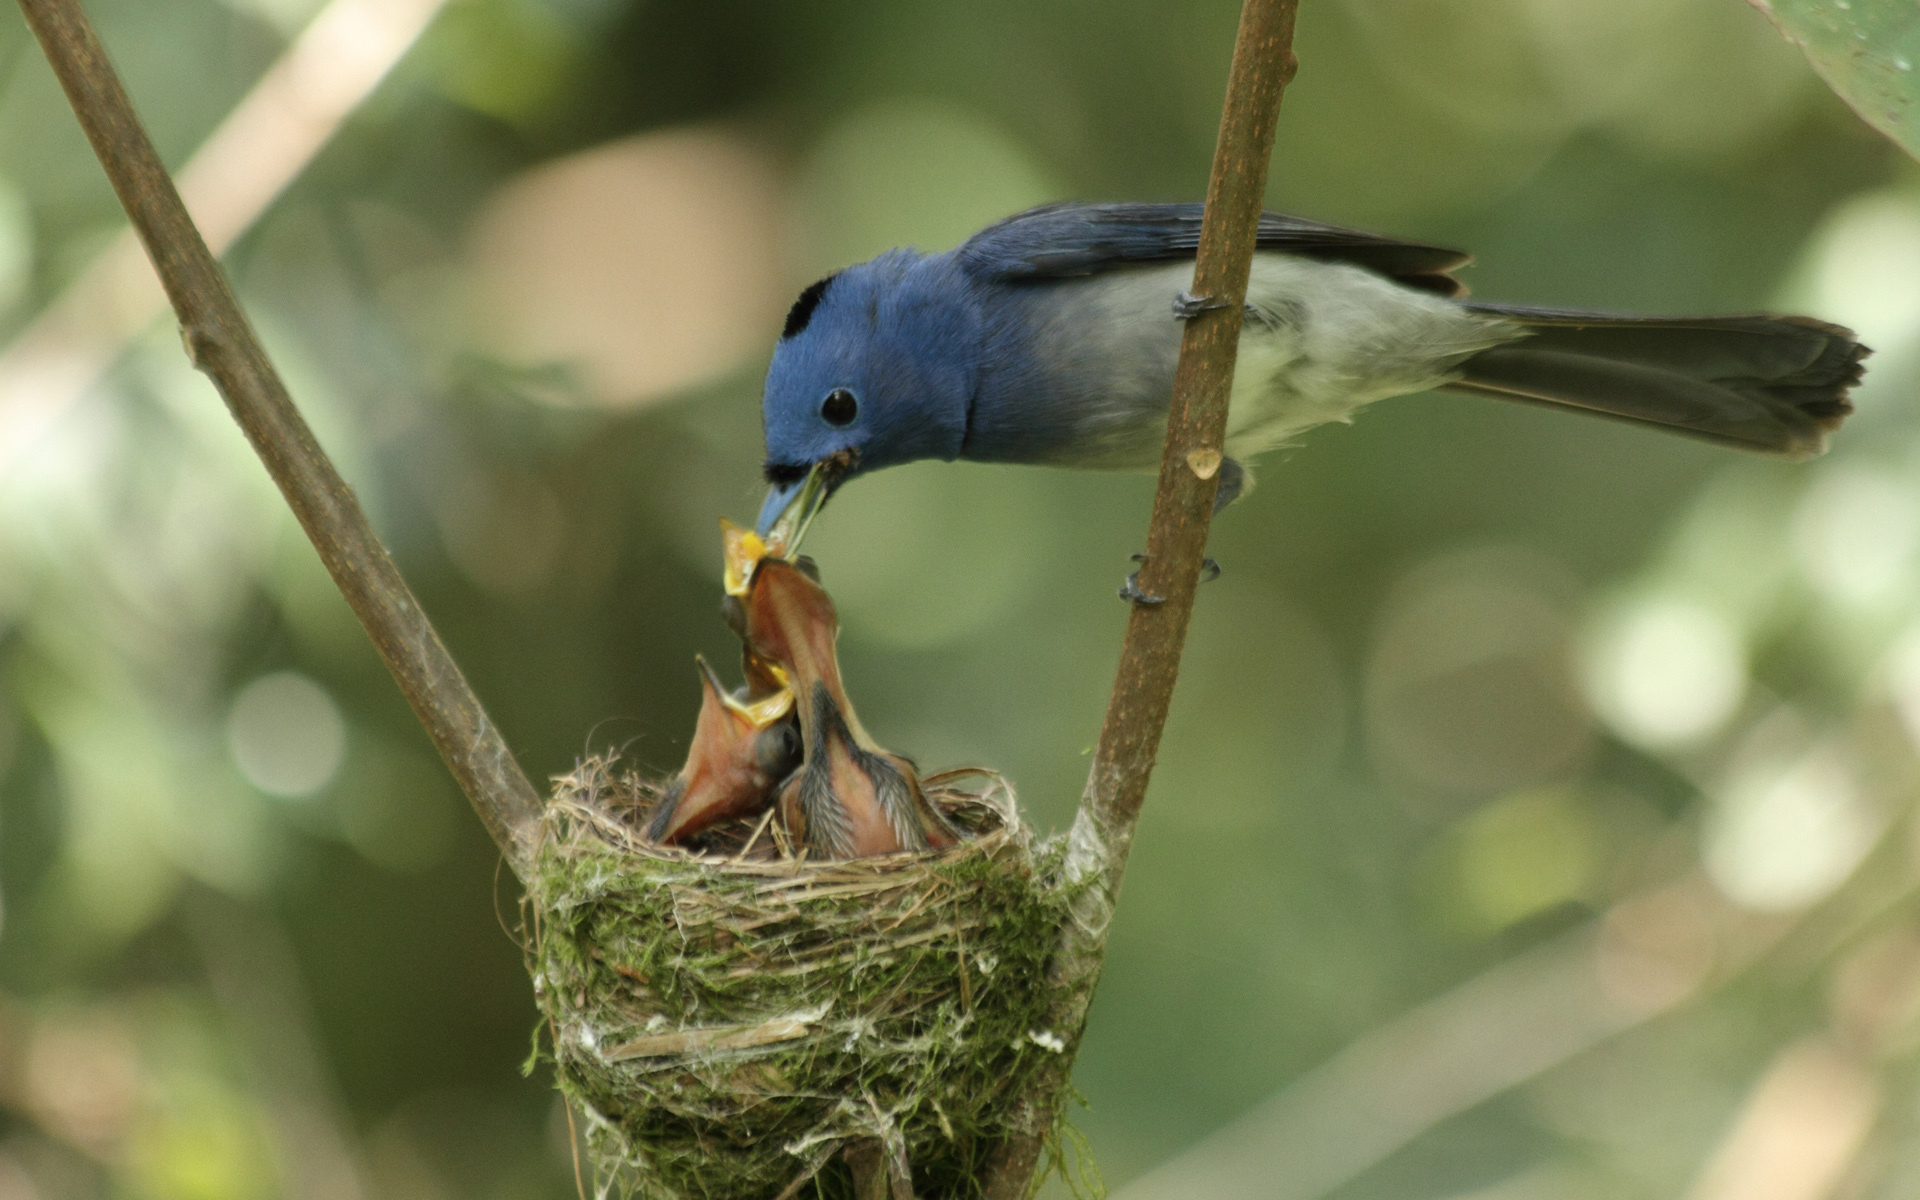 Do Birds Really Abandon their chicks if touched by humans?